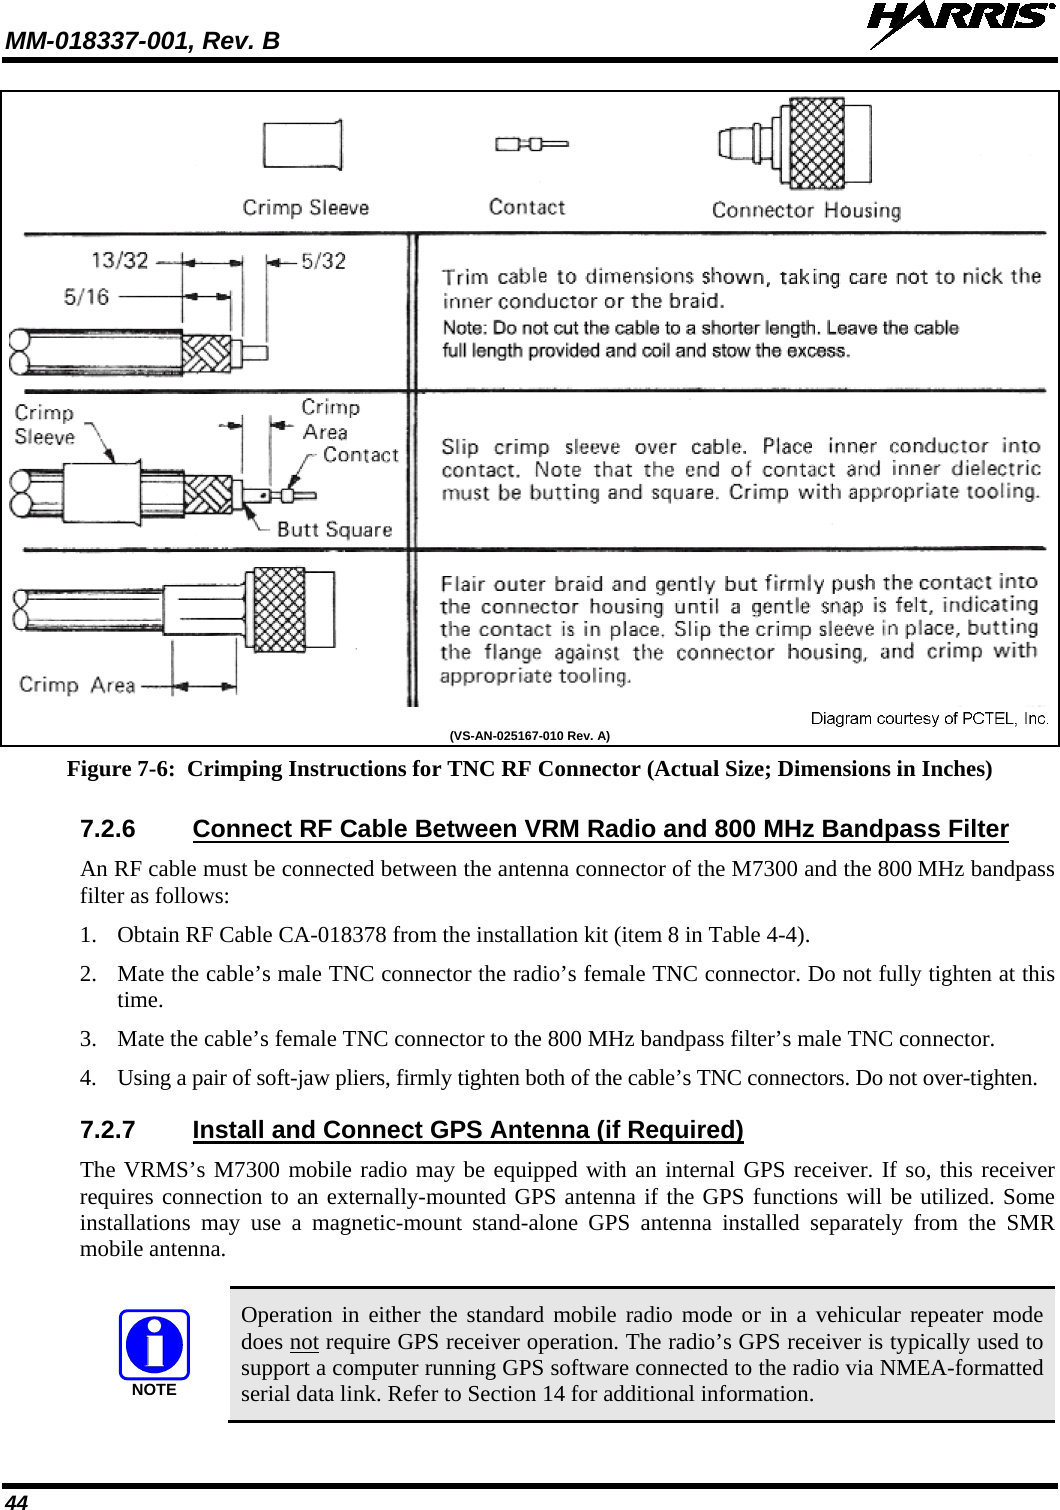 MM-018337-001, Rev. B   44  (VS-AN-025167-010 Rev. A) Figure 7-6:  Crimping Instructions for TNC RF Connector (Actual Size; Dimensions in Inches) 7.2.6 Connect RF Cable Between VRM Radio and 800 MHz Bandpass Filter An RF cable must be connected between the antenna connector of the M7300 and the 800 MHz bandpass filter as follows: 1. Obtain RF Cable CA-018378 from the installation kit (item 8 in Table 4-4). 2. Mate the cable’s male TNC connector the radio’s female TNC connector. Do not fully tighten at this time. 3. Mate the cable’s female TNC connector to the 800 MHz bandpass filter’s male TNC connector. 4. Using a pair of soft-jaw pliers, firmly tighten both of the cable’s TNC connectors. Do not over-tighten. 7.2.7 Install and Connect GPS Antenna (if Required) The VRMS’s M7300 mobile radio may be equipped with an internal GPS receiver. If so, this receiver requires connection to an externally-mounted GPS antenna if the GPS functions will be utilized. Some installations may use a magnetic-mount stand-alone GPS antenna installed separately from the SMR mobile antenna.  NOTE Operation in either the standard mobile radio mode or in a vehicular repeater mode does not require GPS receiver operation. The radio’s GPS receiver is typically used to support a computer running GPS software connected to the radio via NMEA-formatted serial data link. Refer to Section 14 for additional information. 